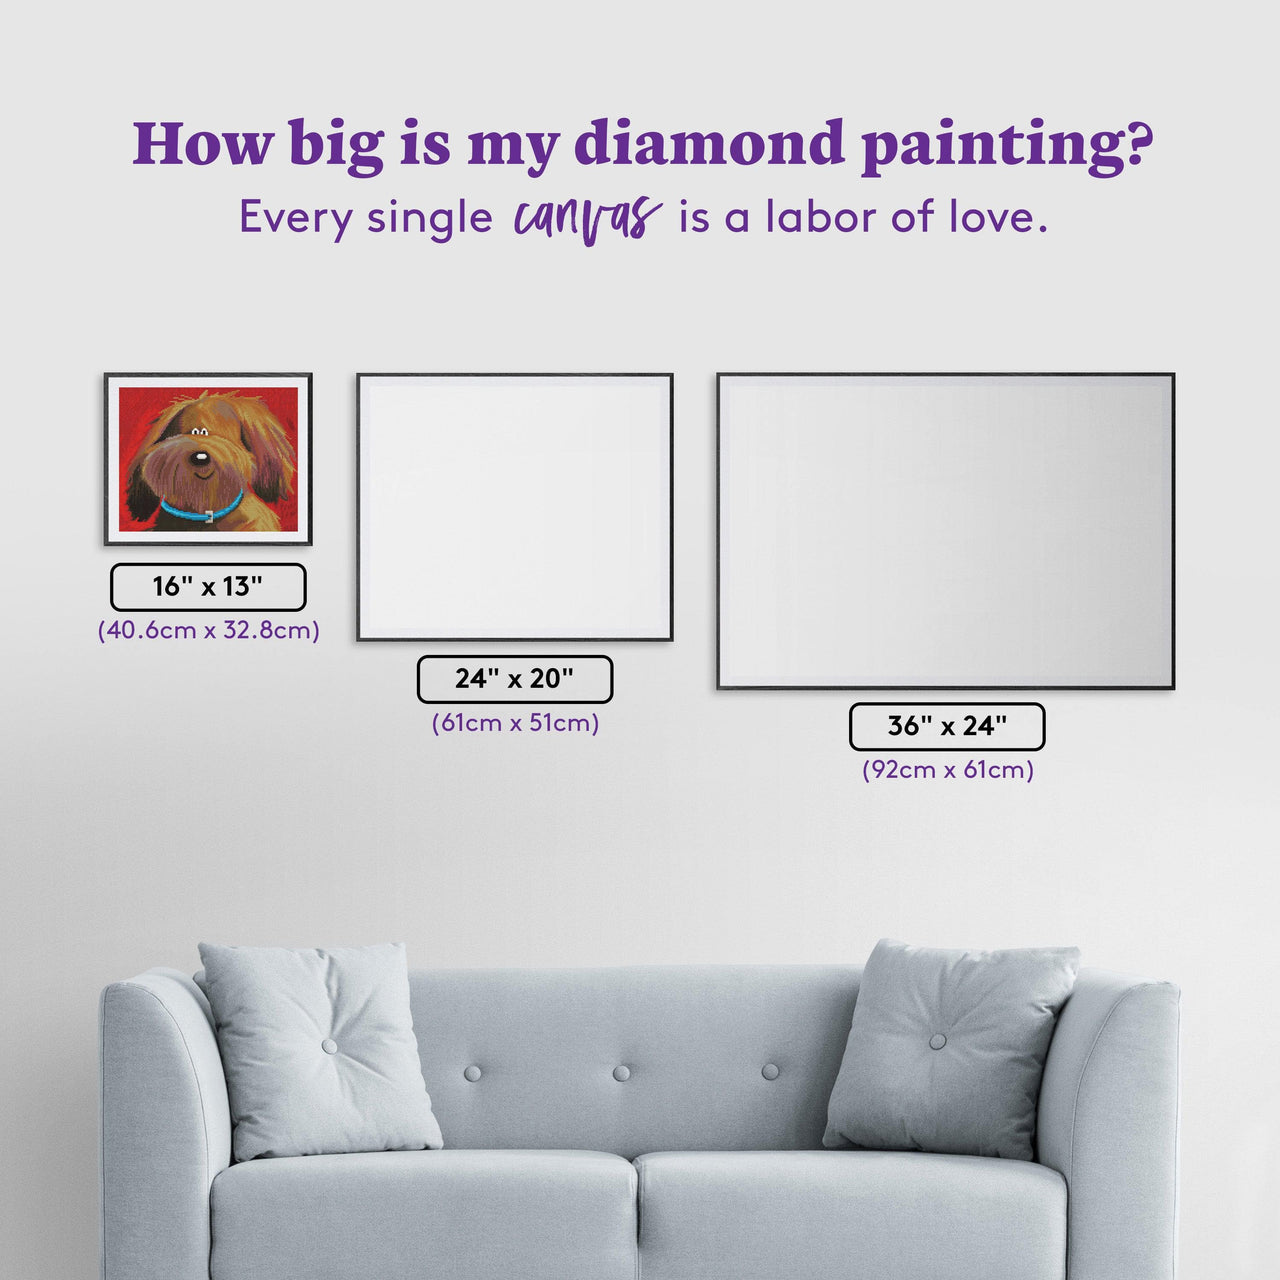 Diamond Painting Happy You're Home 16" x 13" (40.6cm x 32.8cm) / Round with 30 Colors including 2 ABs / 16,965